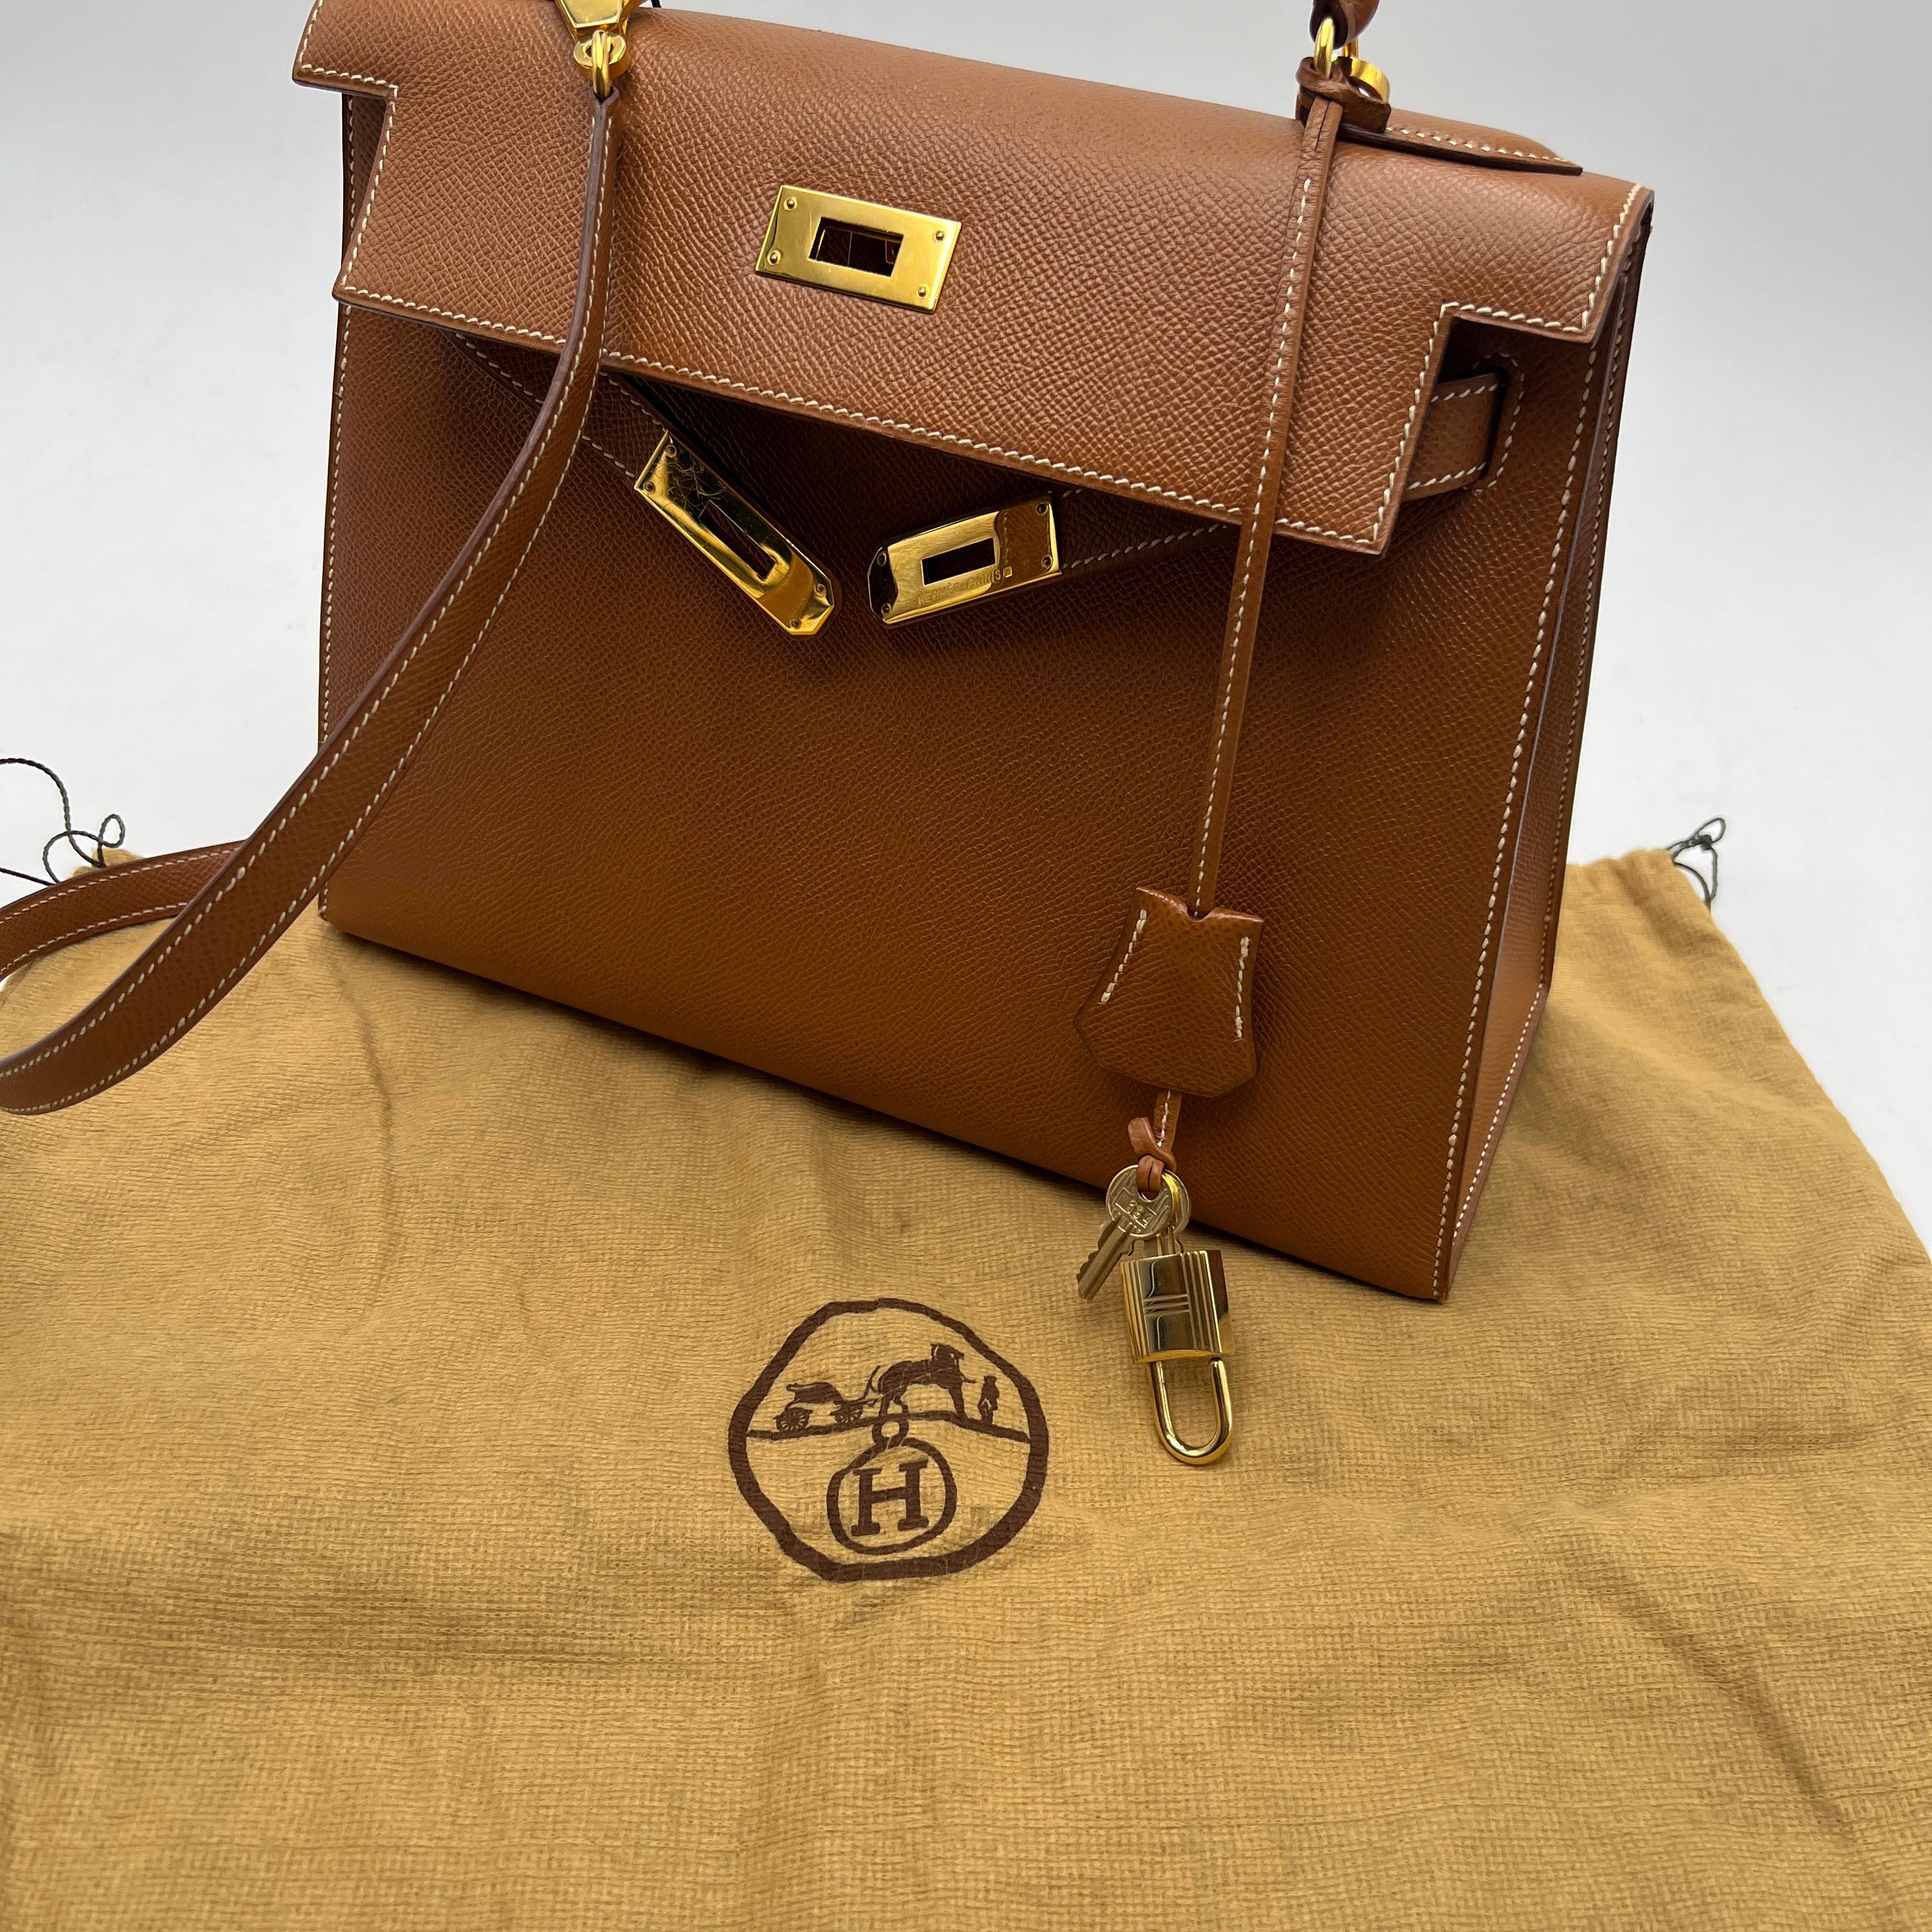 This beautiful Bag will come with a Certificate of Authenticity provided by Entrupy. The certificate will be provided at no further cost. The famous Hermes KELLY BAG 28, mod. Sellier , crafted in beige Couchevel leather from 1993 (blind stamp is 'W'